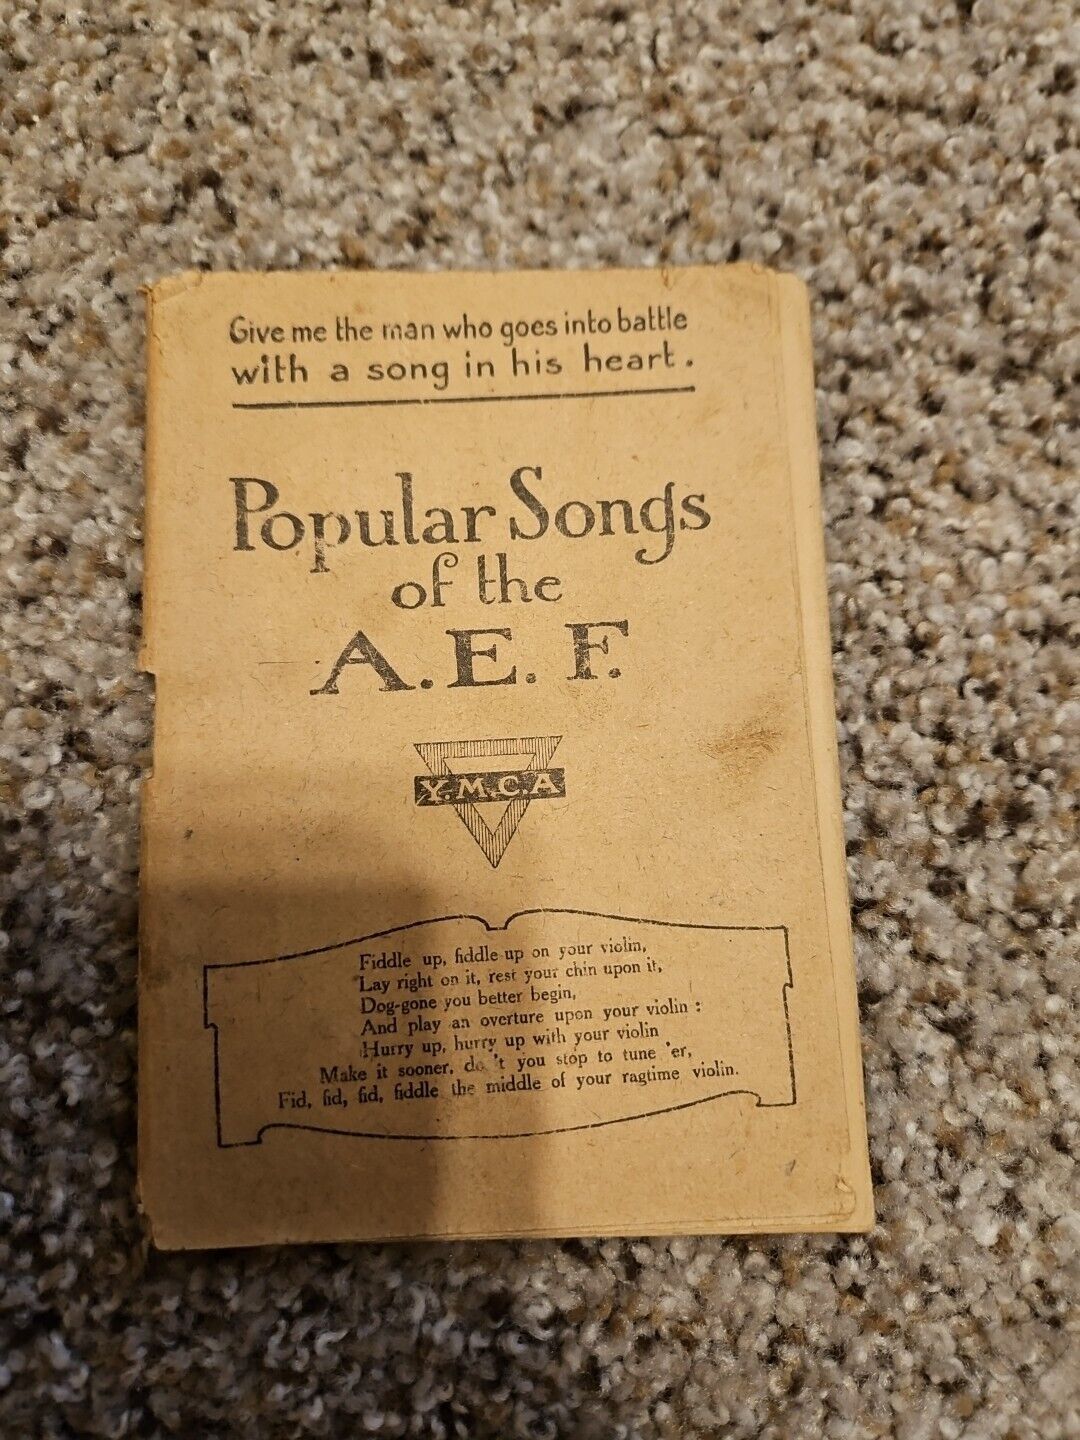 YMCA Song Booklet Antique 1919 Popular Songs of the AEF